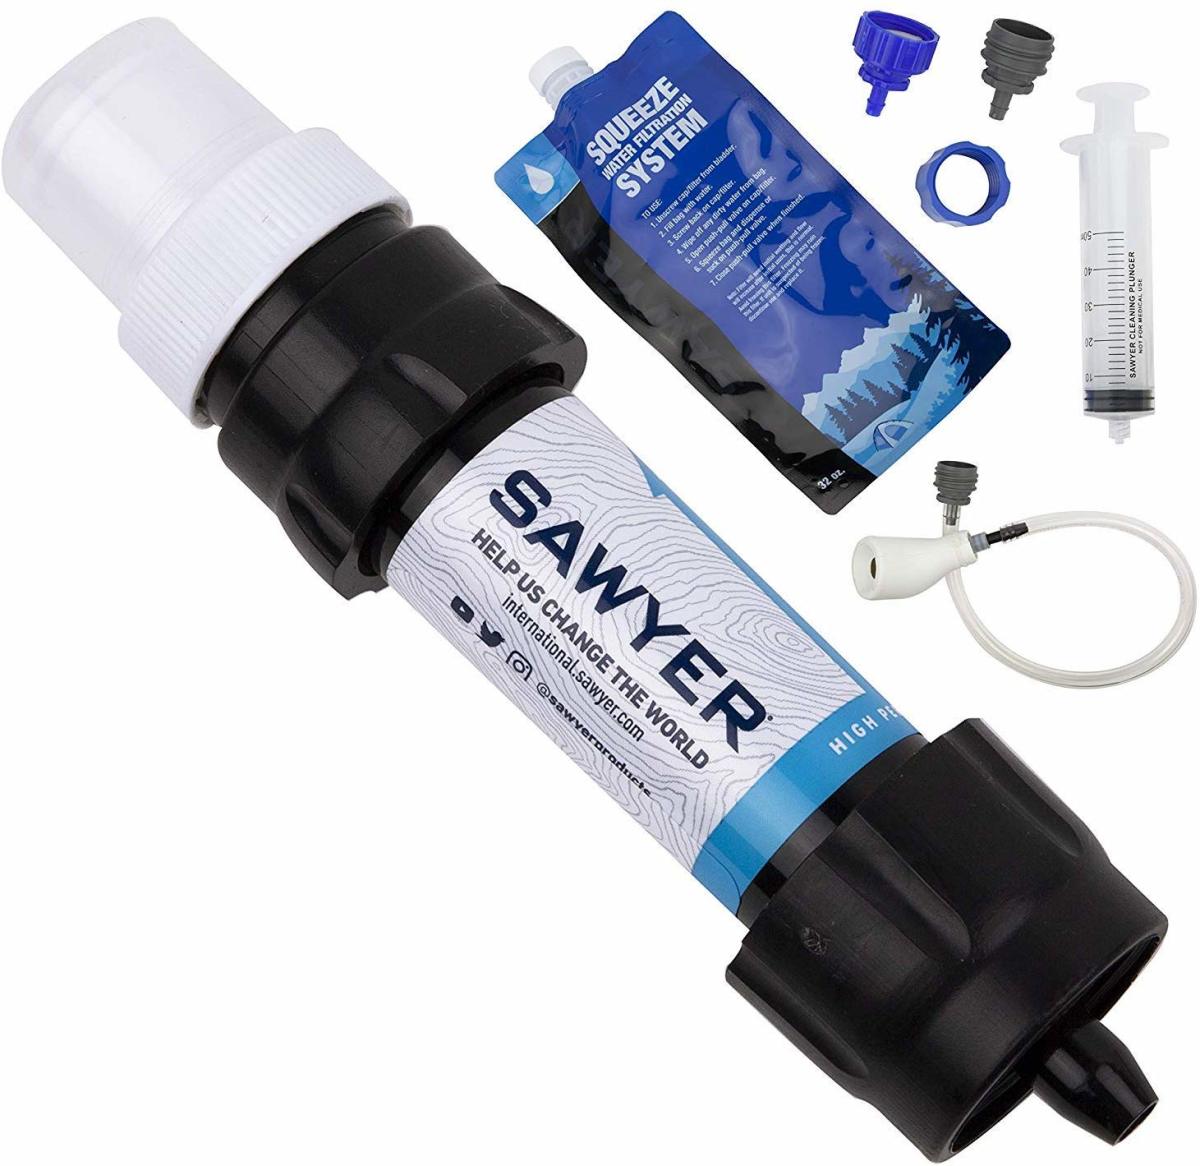 The Sawyer Water Filter is in my opinion a must have